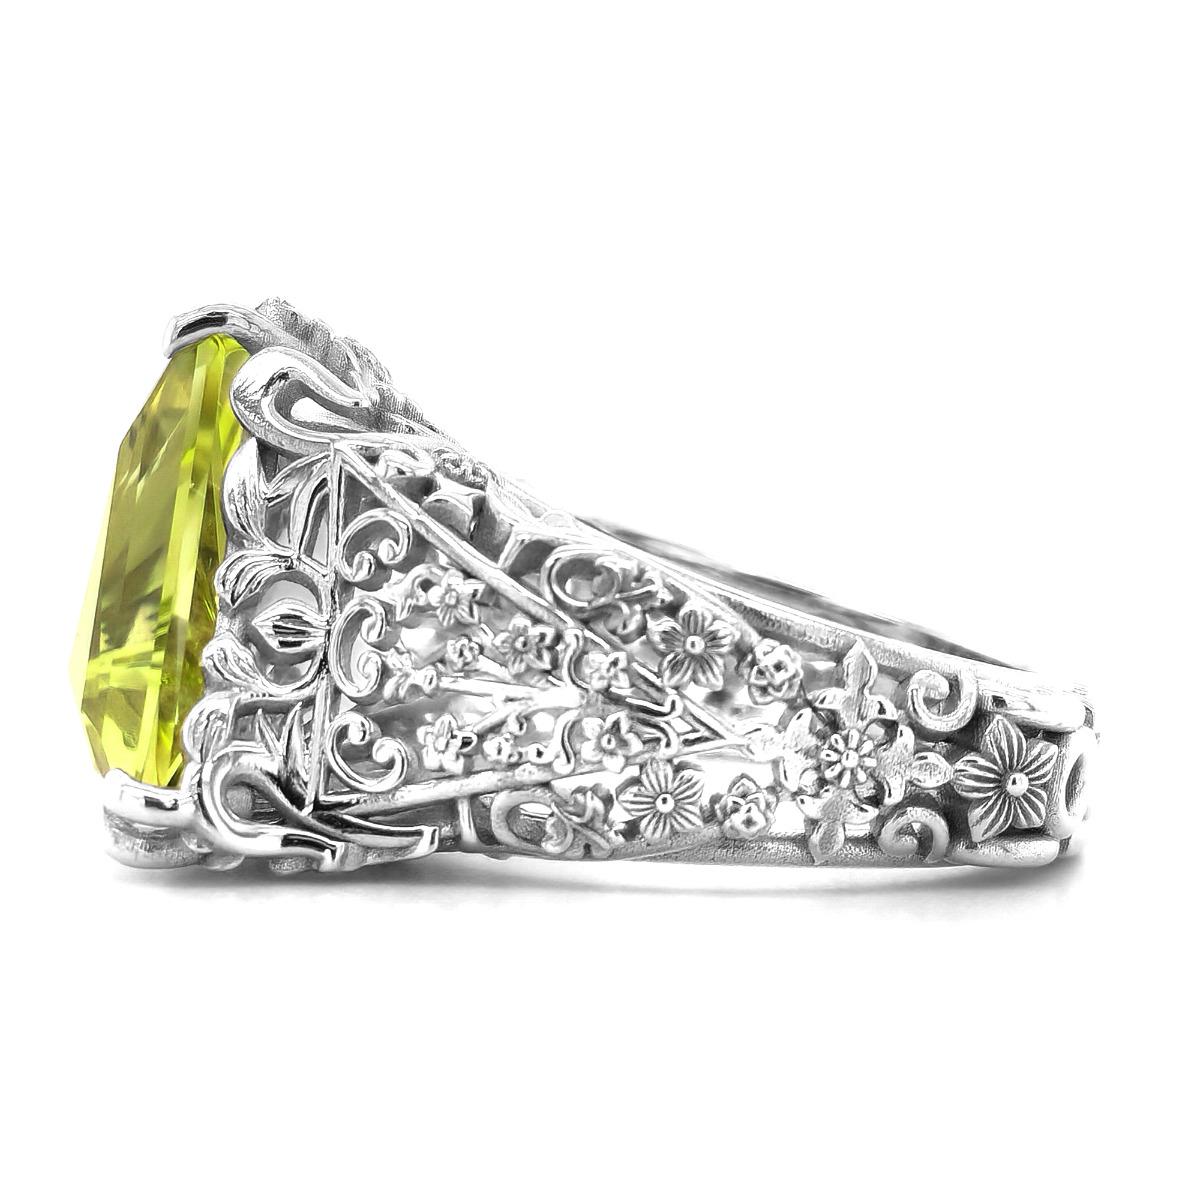 Set in 18K White Gold this warm yet lustrous Greenish Yellow Beryl is a gemstone she will love. A well-cut gem, its majesty will have her blushing with color. Triangular in shape, a cut that easily flatters, eye clean with no visible features, this